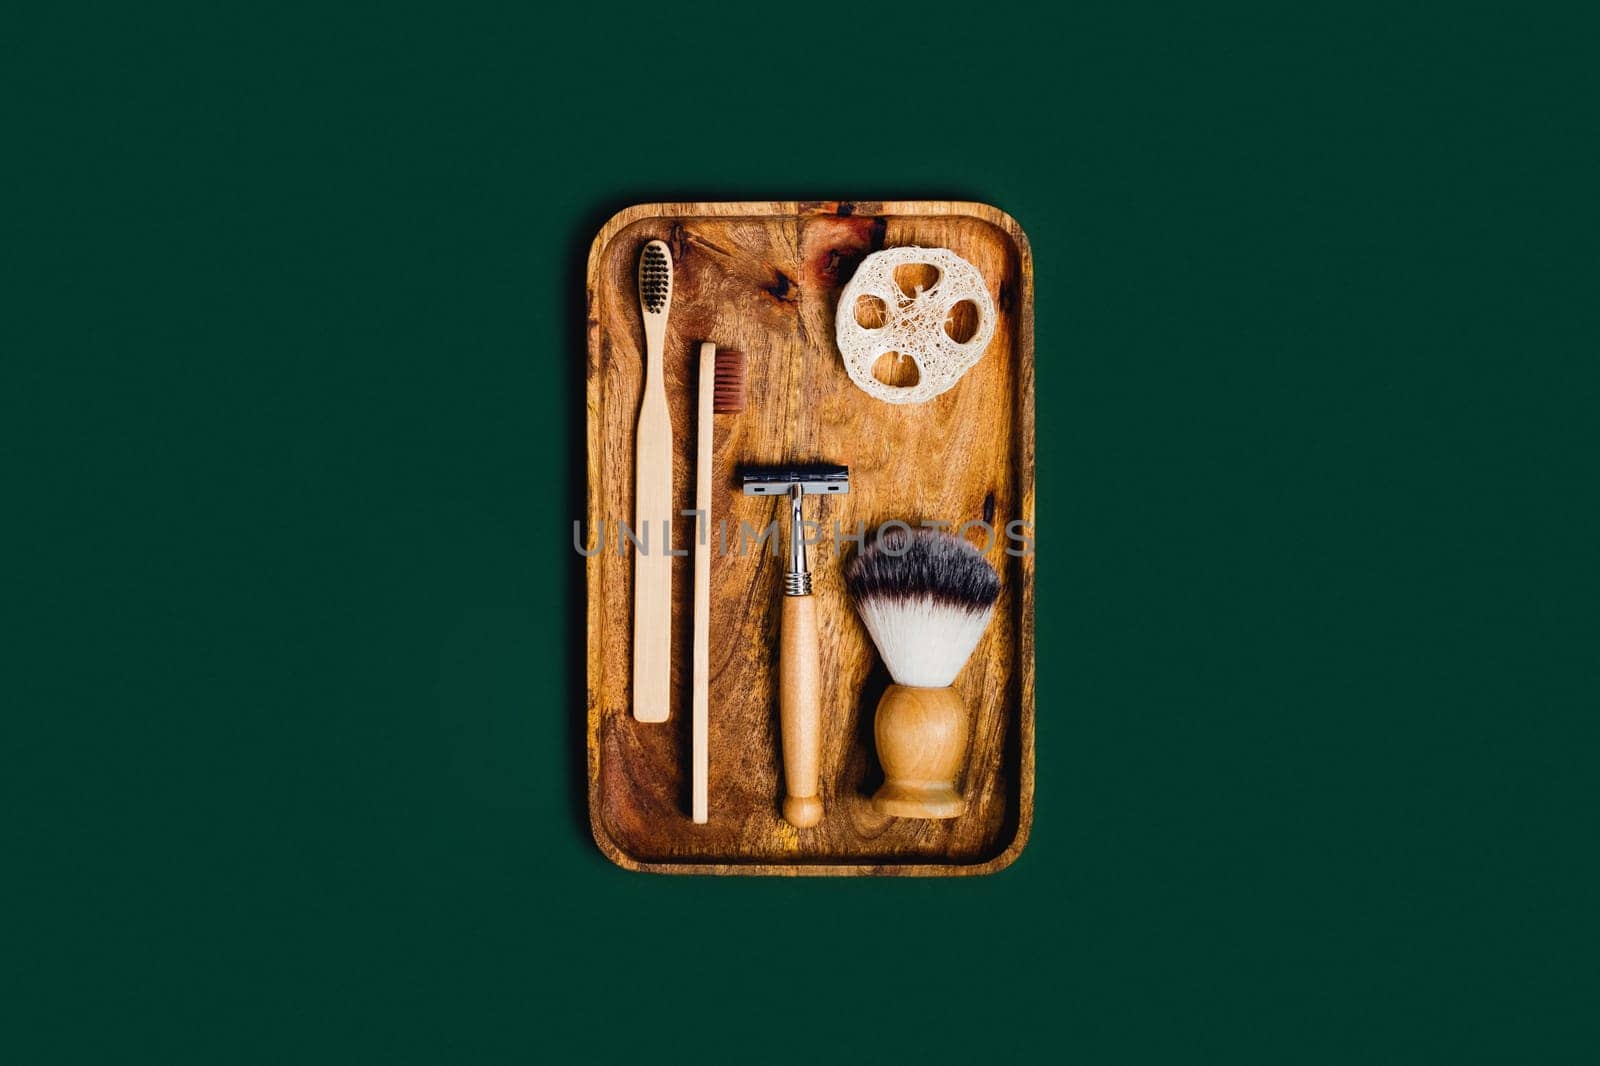 Zero waste concept. Natural bamboo toothbrushes , razor, natural sponge, shaving brush located on wooden tray on green background.